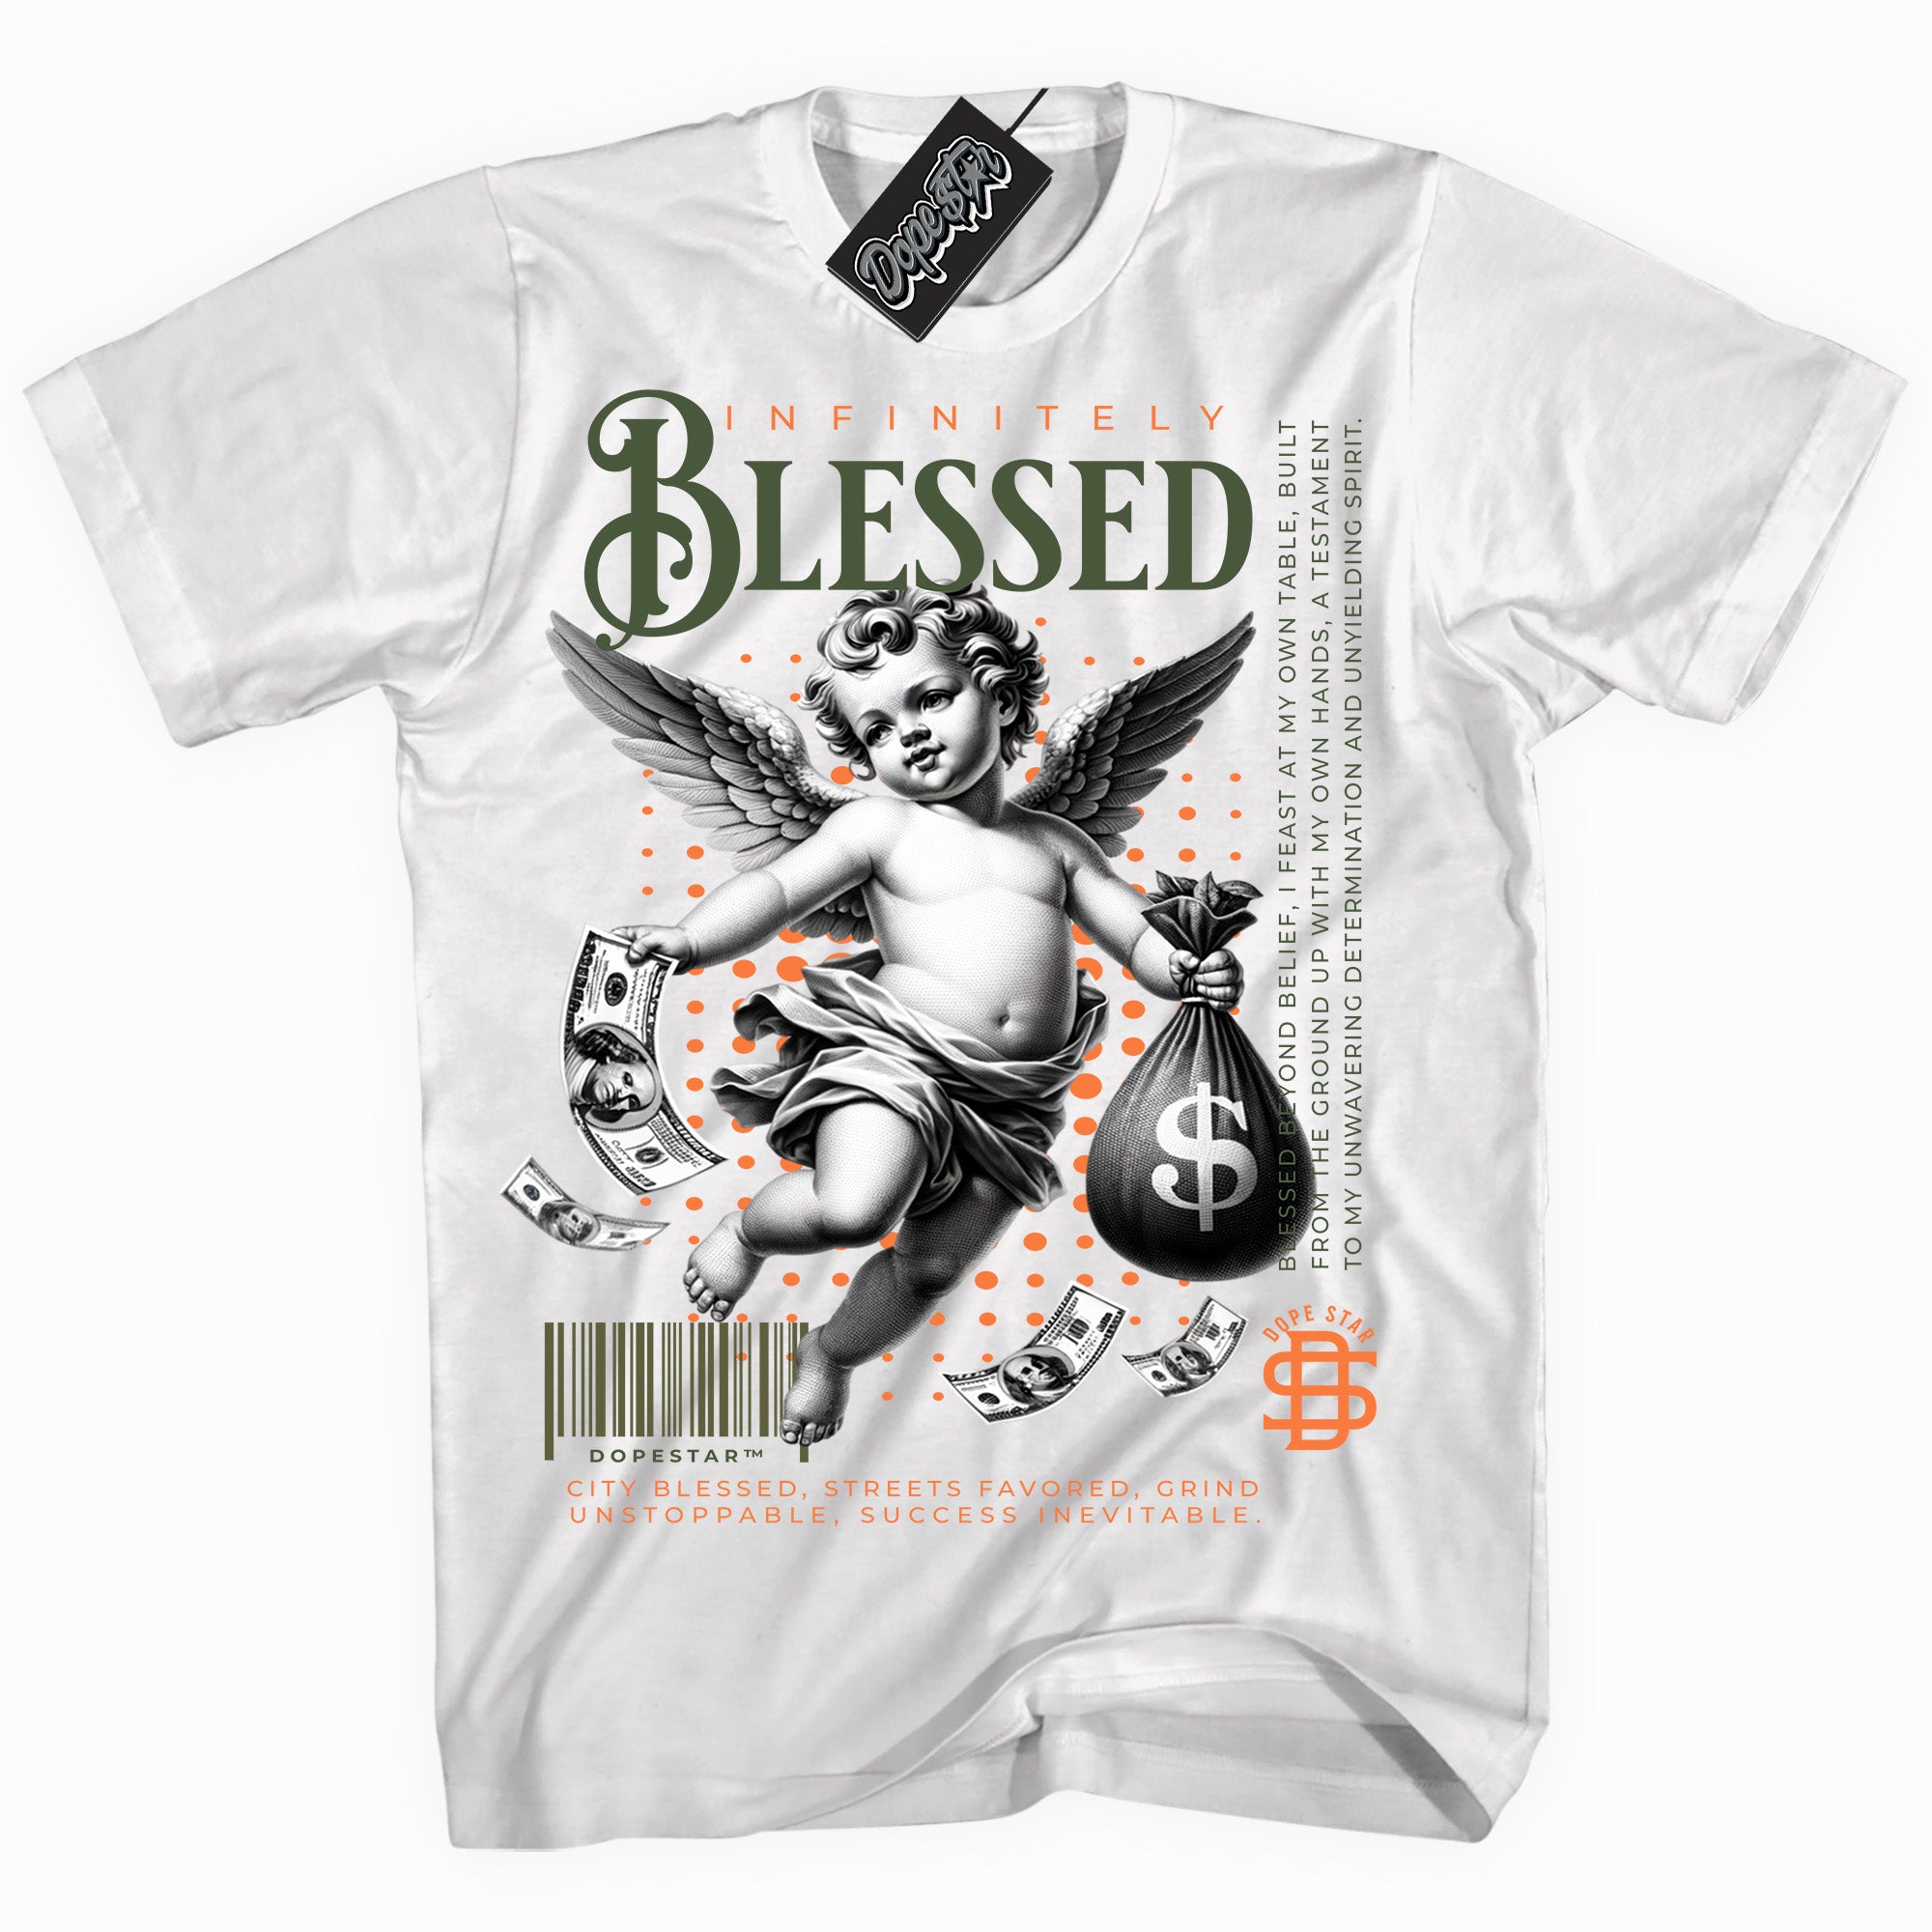 Cool White graphic tee with “ Infinitely Blessed ” print, that perfectly matches Olive 5s sneakers 